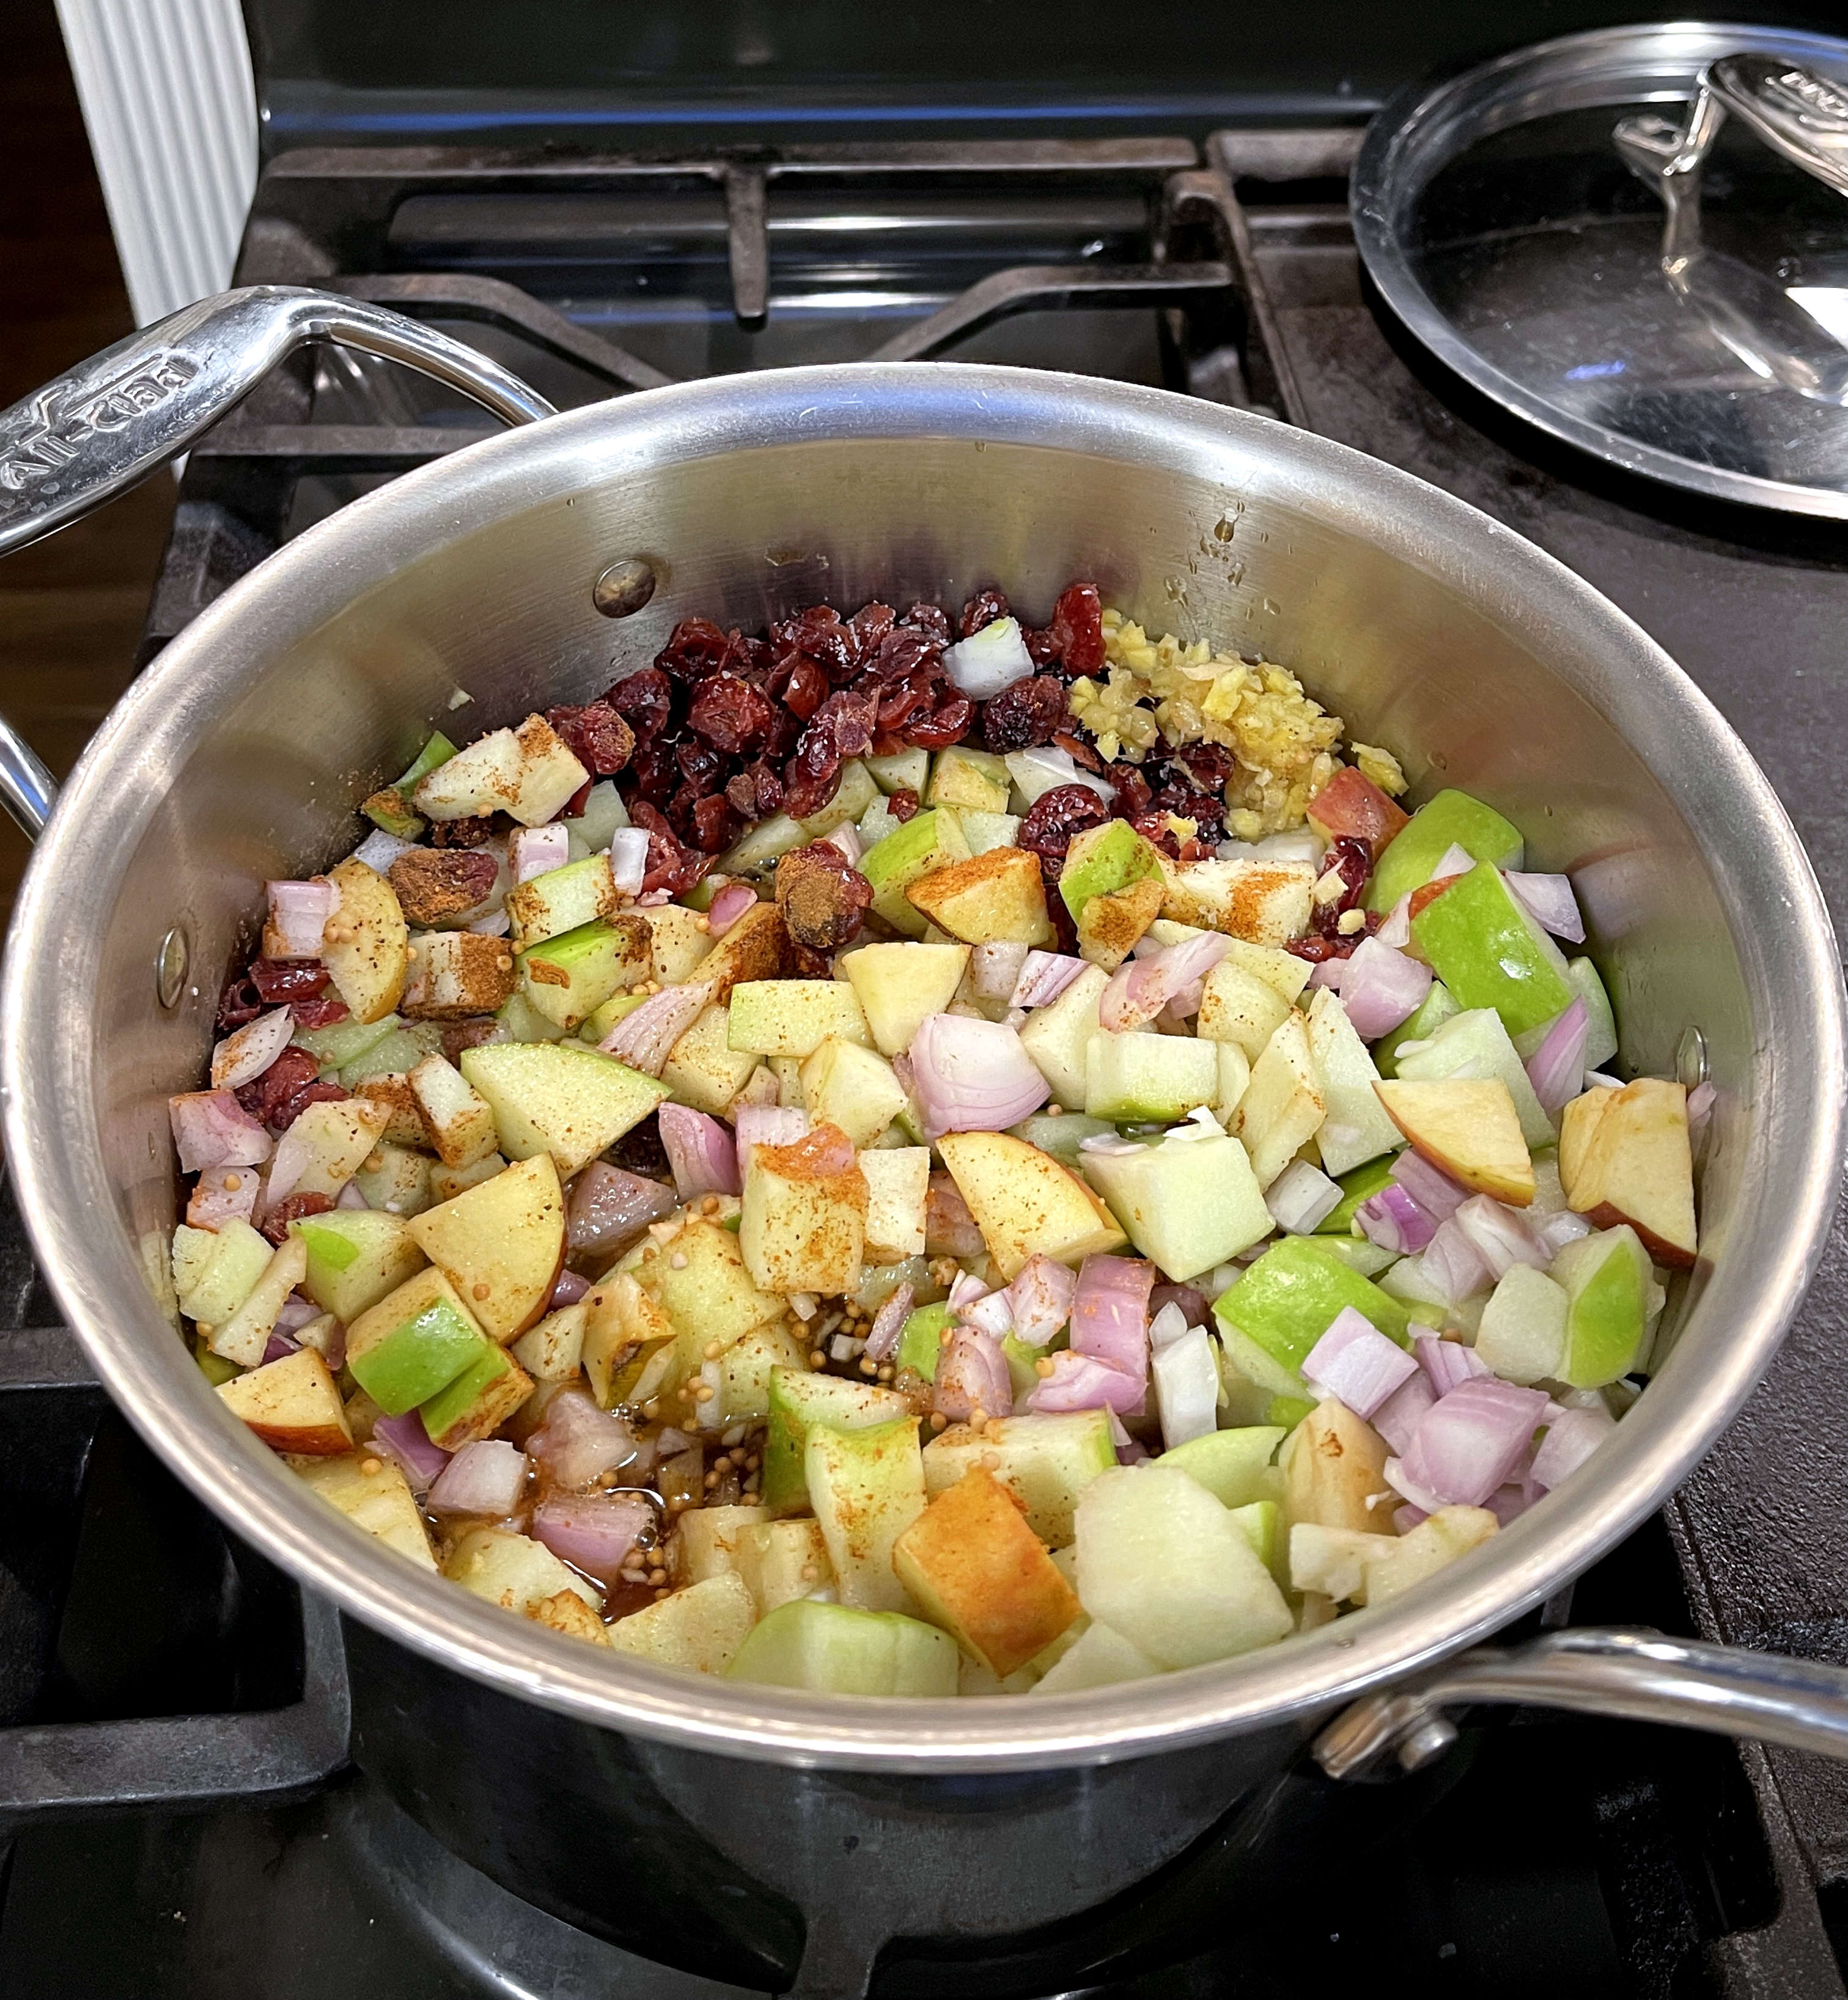 Chopped chutney ingredients in a stainless steel pot sitting on the stove at the start of cooking. The ingredients include apples, shallot, minced garlic, dried cranberries, vinegar and spices.